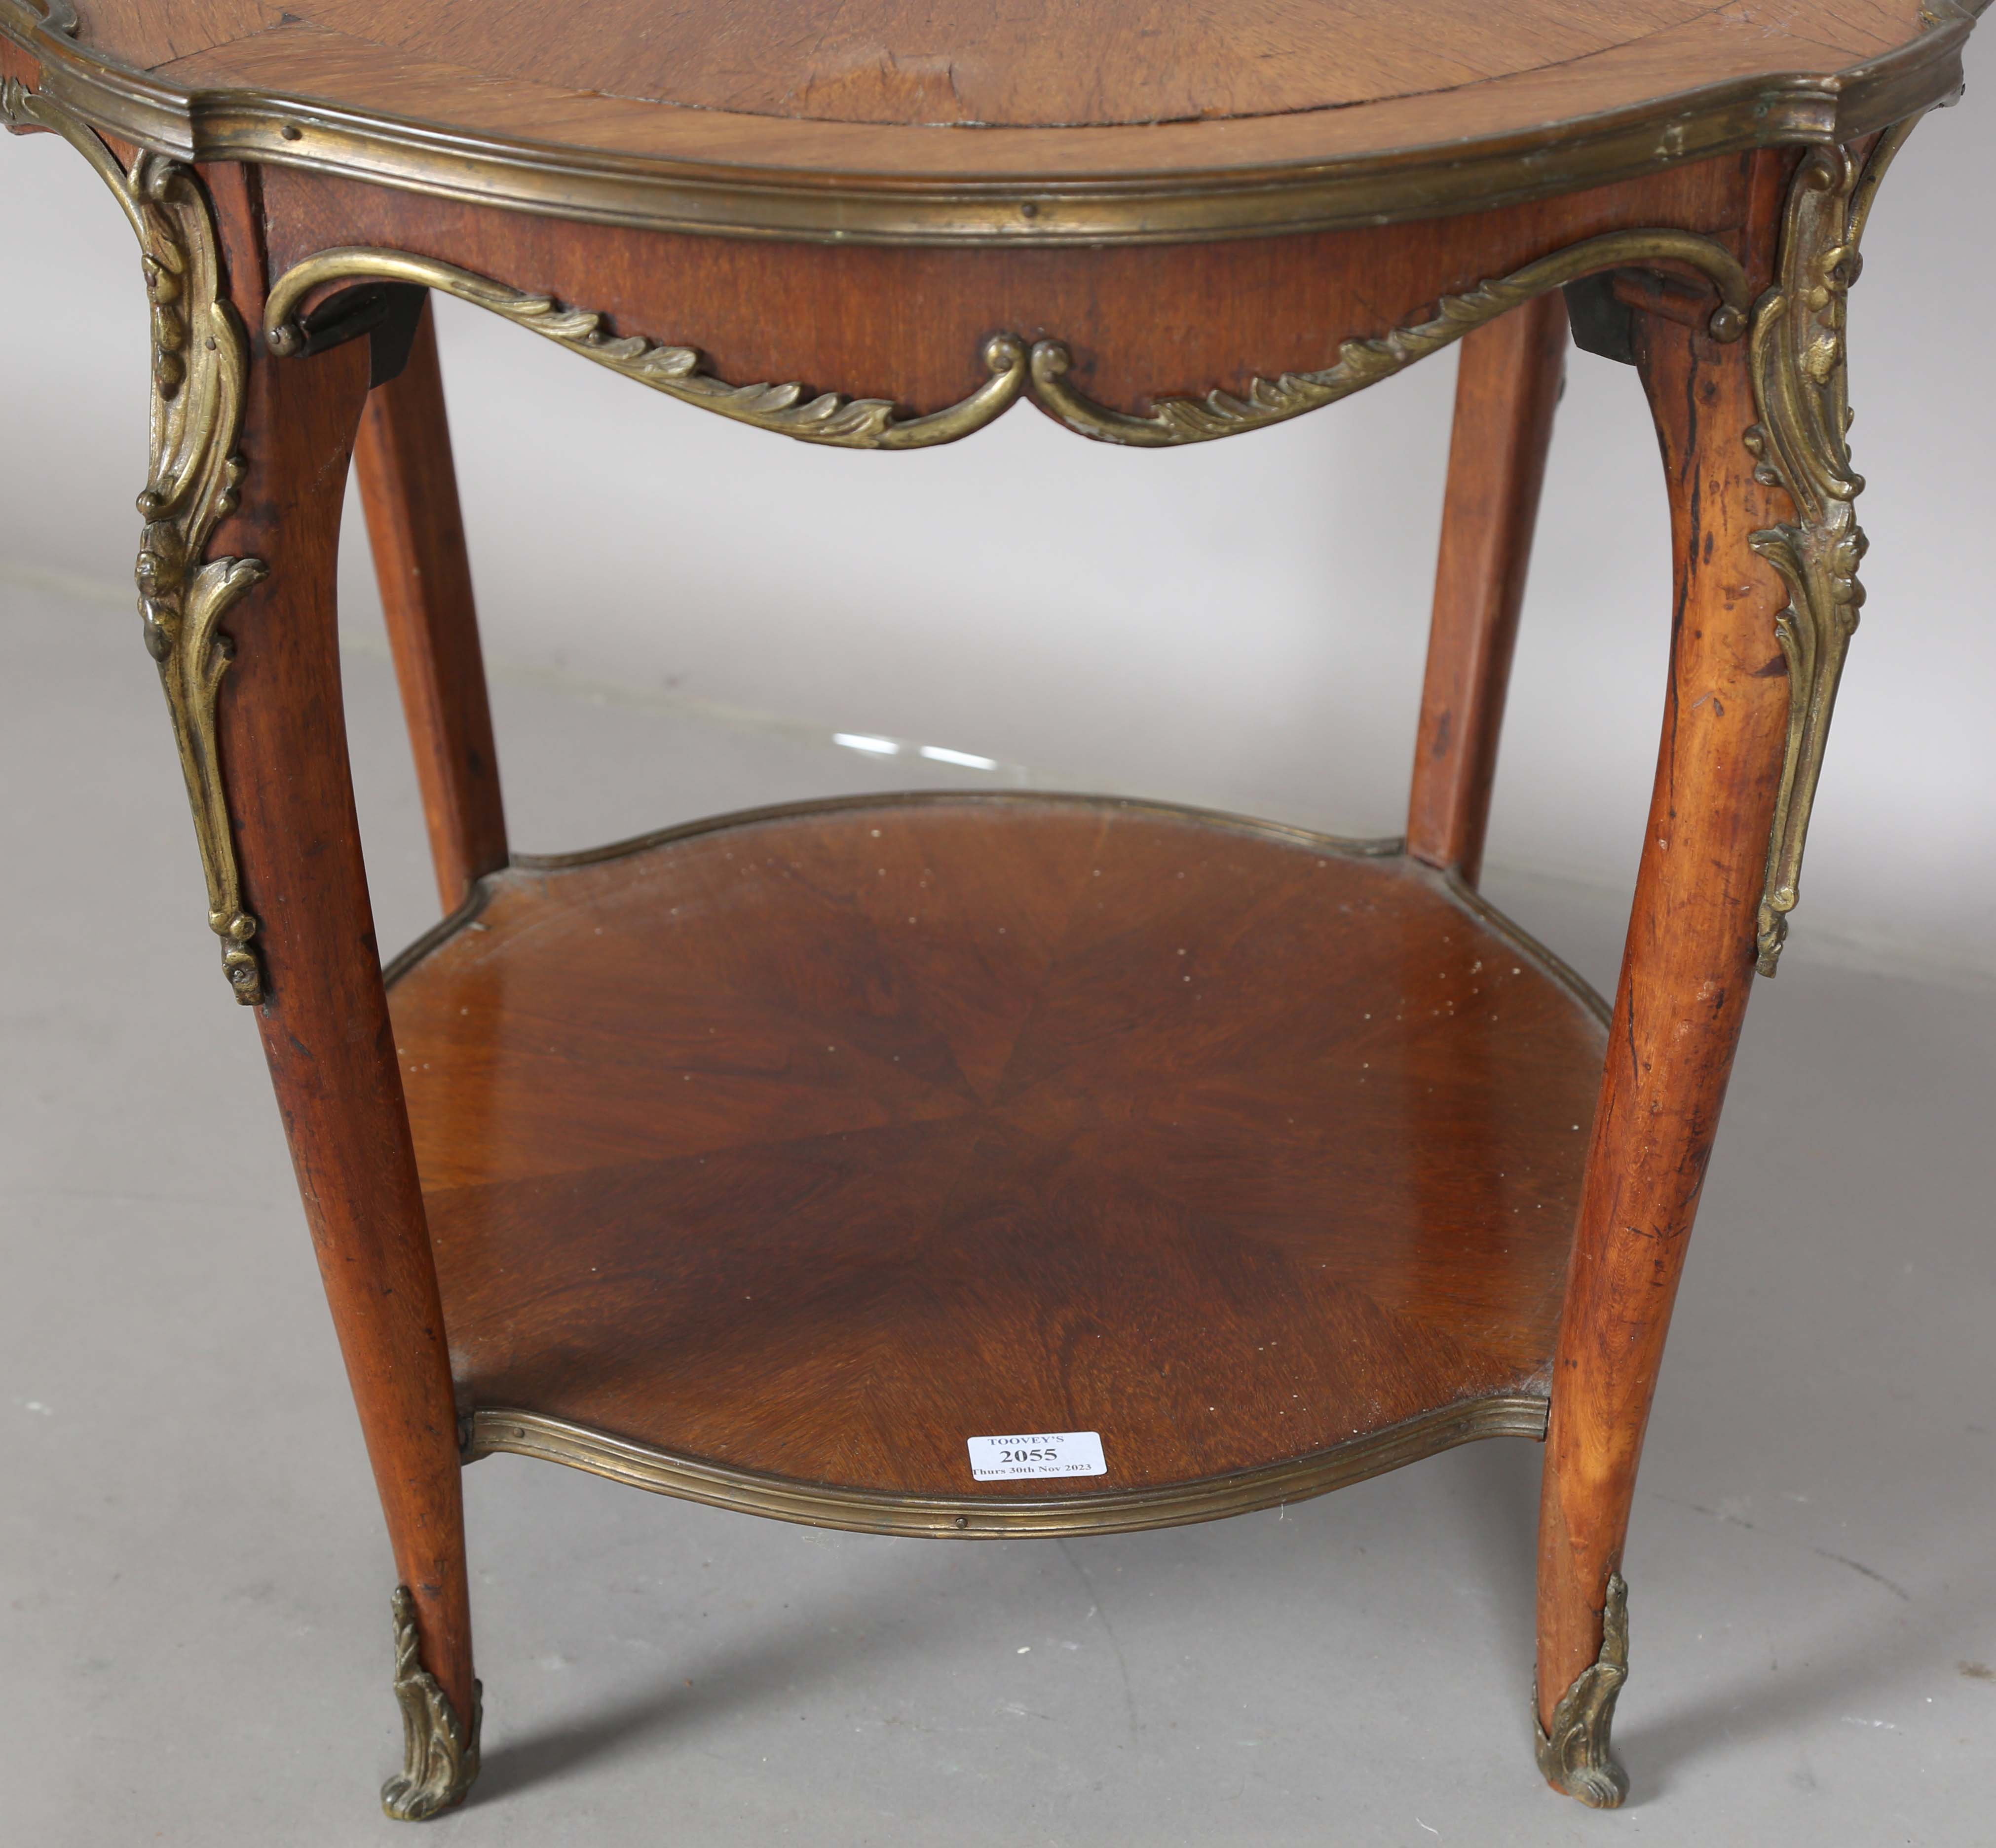 An early 20th century French walnut two-tier occasional table with radial veneers and gilt metal - Image 6 of 11